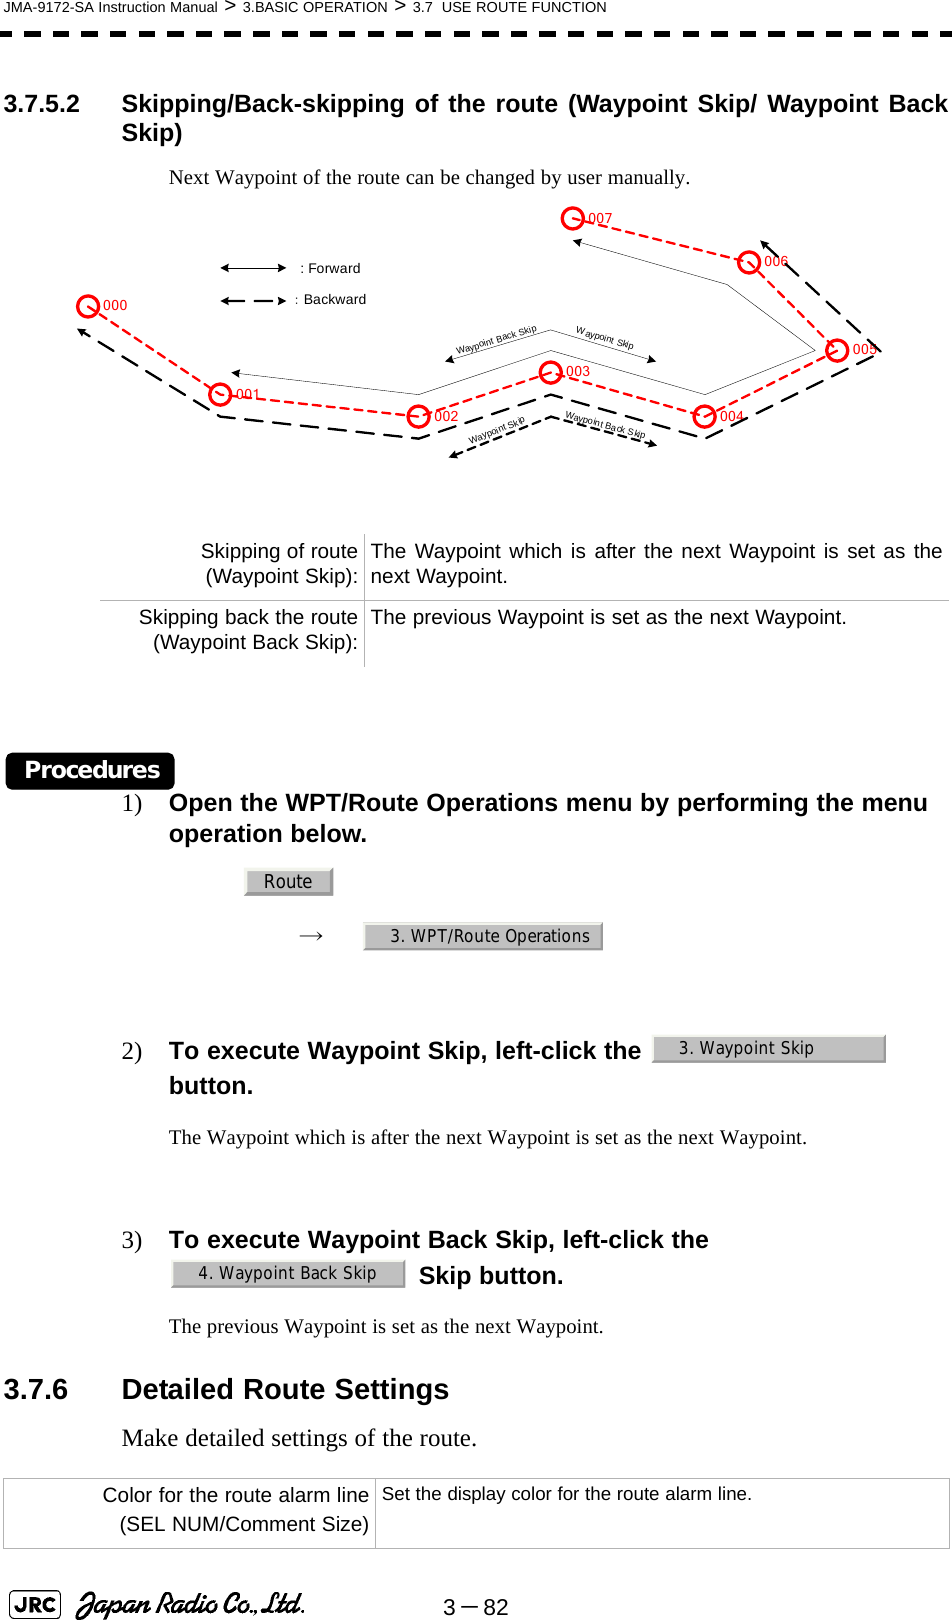 3－82JMA-9172-SA Instruction Manual &gt; 3.BASIC OPERATION &gt; 3.7  USE ROUTE FUNCTION3.7.5.2 Skipping/Back-skipping of the route (Waypoint Skip/ Waypoint BackSkip)Next Waypoint of the route can be changed by user manually.Procedures1) Open the WPT/Route Operations menu by performing the menu operation below.→　2) To execute Waypoint Skip, left-click the    button.The Waypoint which is after the next Waypoint is set as the next Waypoint.3) To execute Waypoint Back Skip, left-click the  Skip button.The previous Waypoint is set as the next Waypoint.3.7.6 Detailed Route SettingsMake detailed settings of the route.Skipping of route(Waypoint Skip): The Waypoint which is after the next Waypoint is set as thenext Waypoint.Skipping back the route(Waypoint Back Skip): The previous Waypoint is set as the next Waypoint.Color for the route alarm line(SEL NUM/Comment Size)Set the display color for the route alarm line.001002003004005006007000 : Forward：BackwardWaypoint SkipWaypoint Back SkipWaypoint SkipWaypoint Back SkipRoute3. WPT/Route Operations3. Waypoint Skip4. Waypoint Back Skip